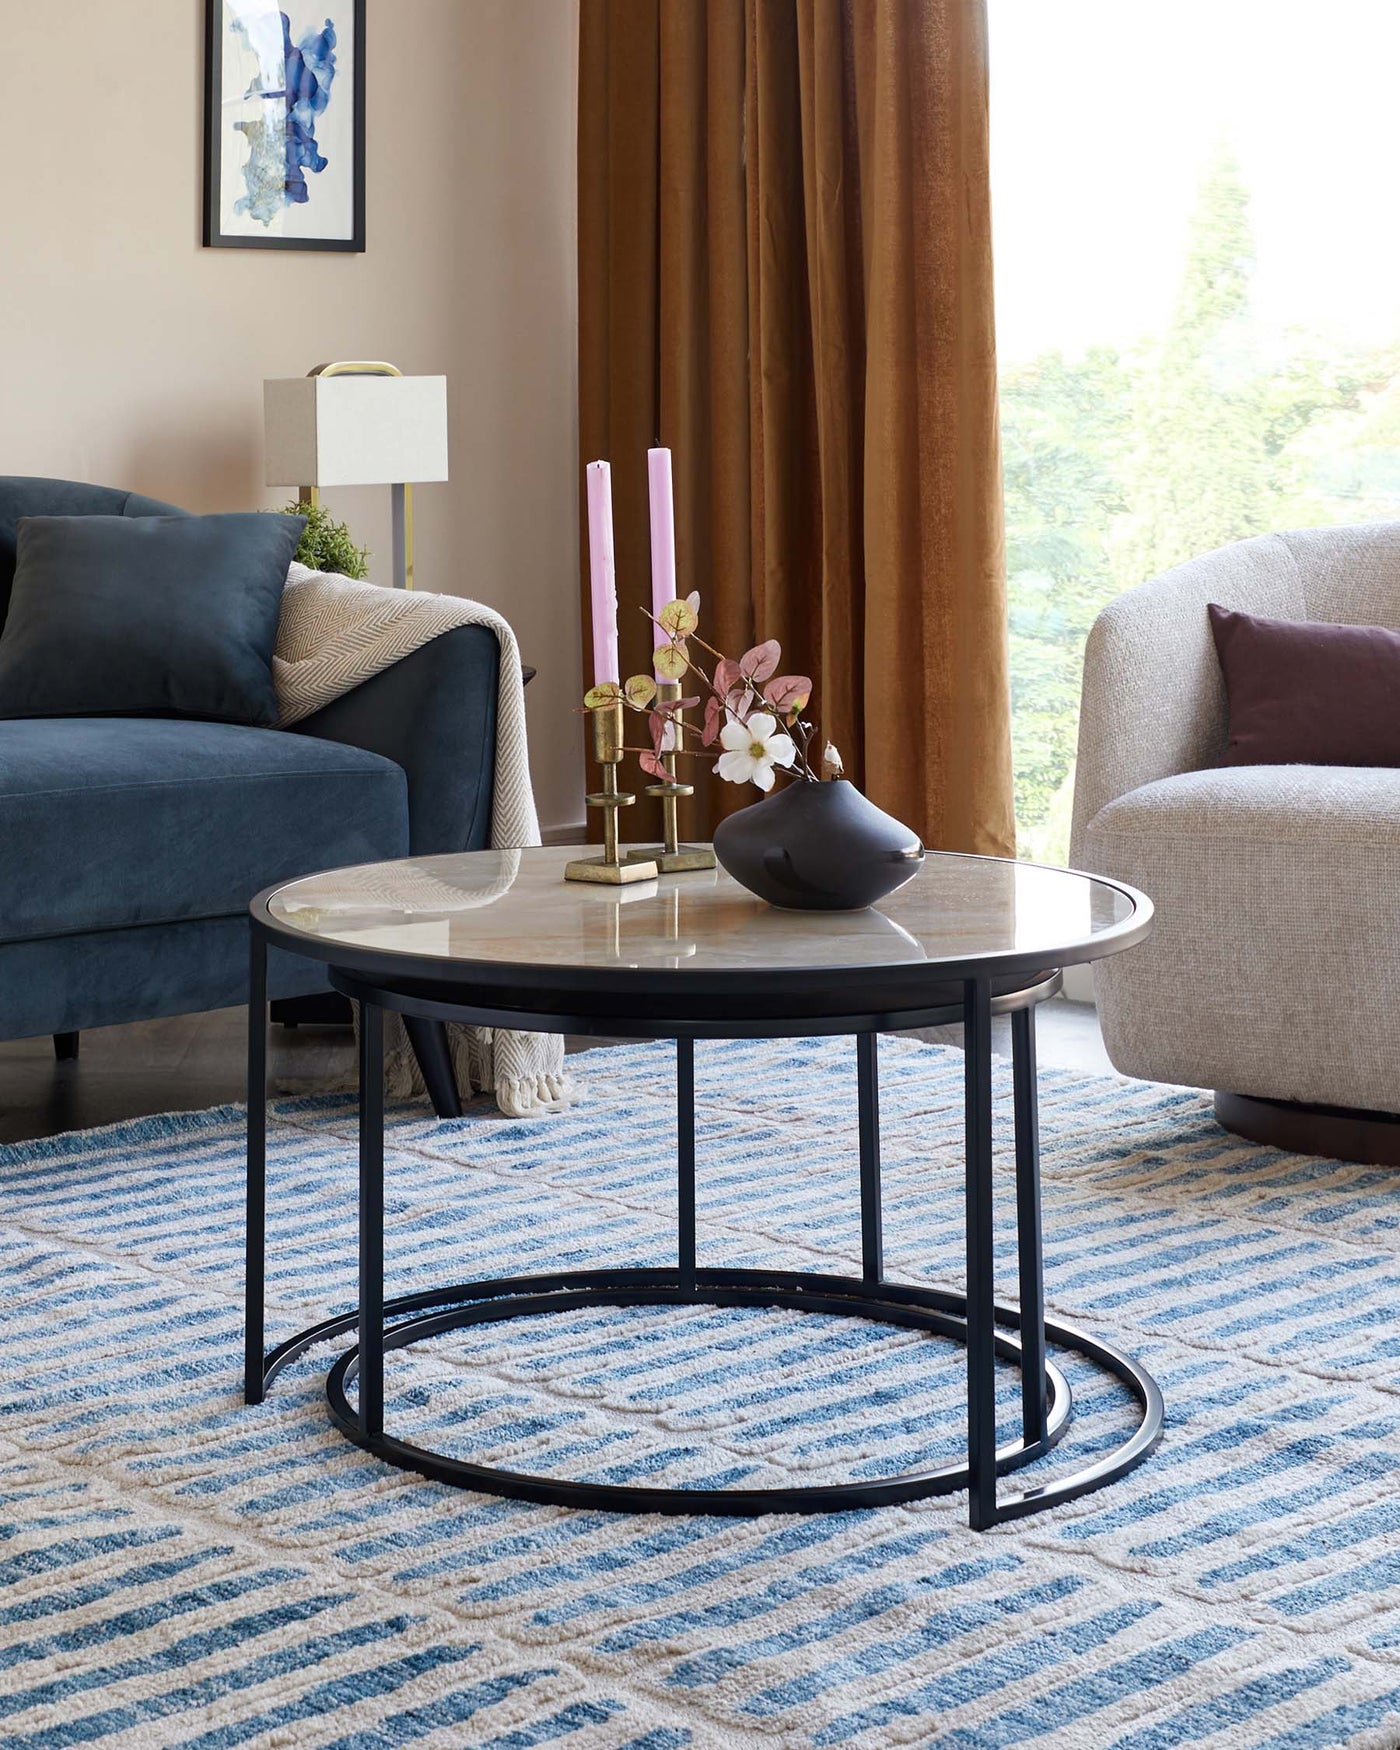 Round marble-top coffee table with a black metal frame, positioned on a blue and white patterned area rug, flanked by a dark-blue upholstered sofa and a light-beige armchair.